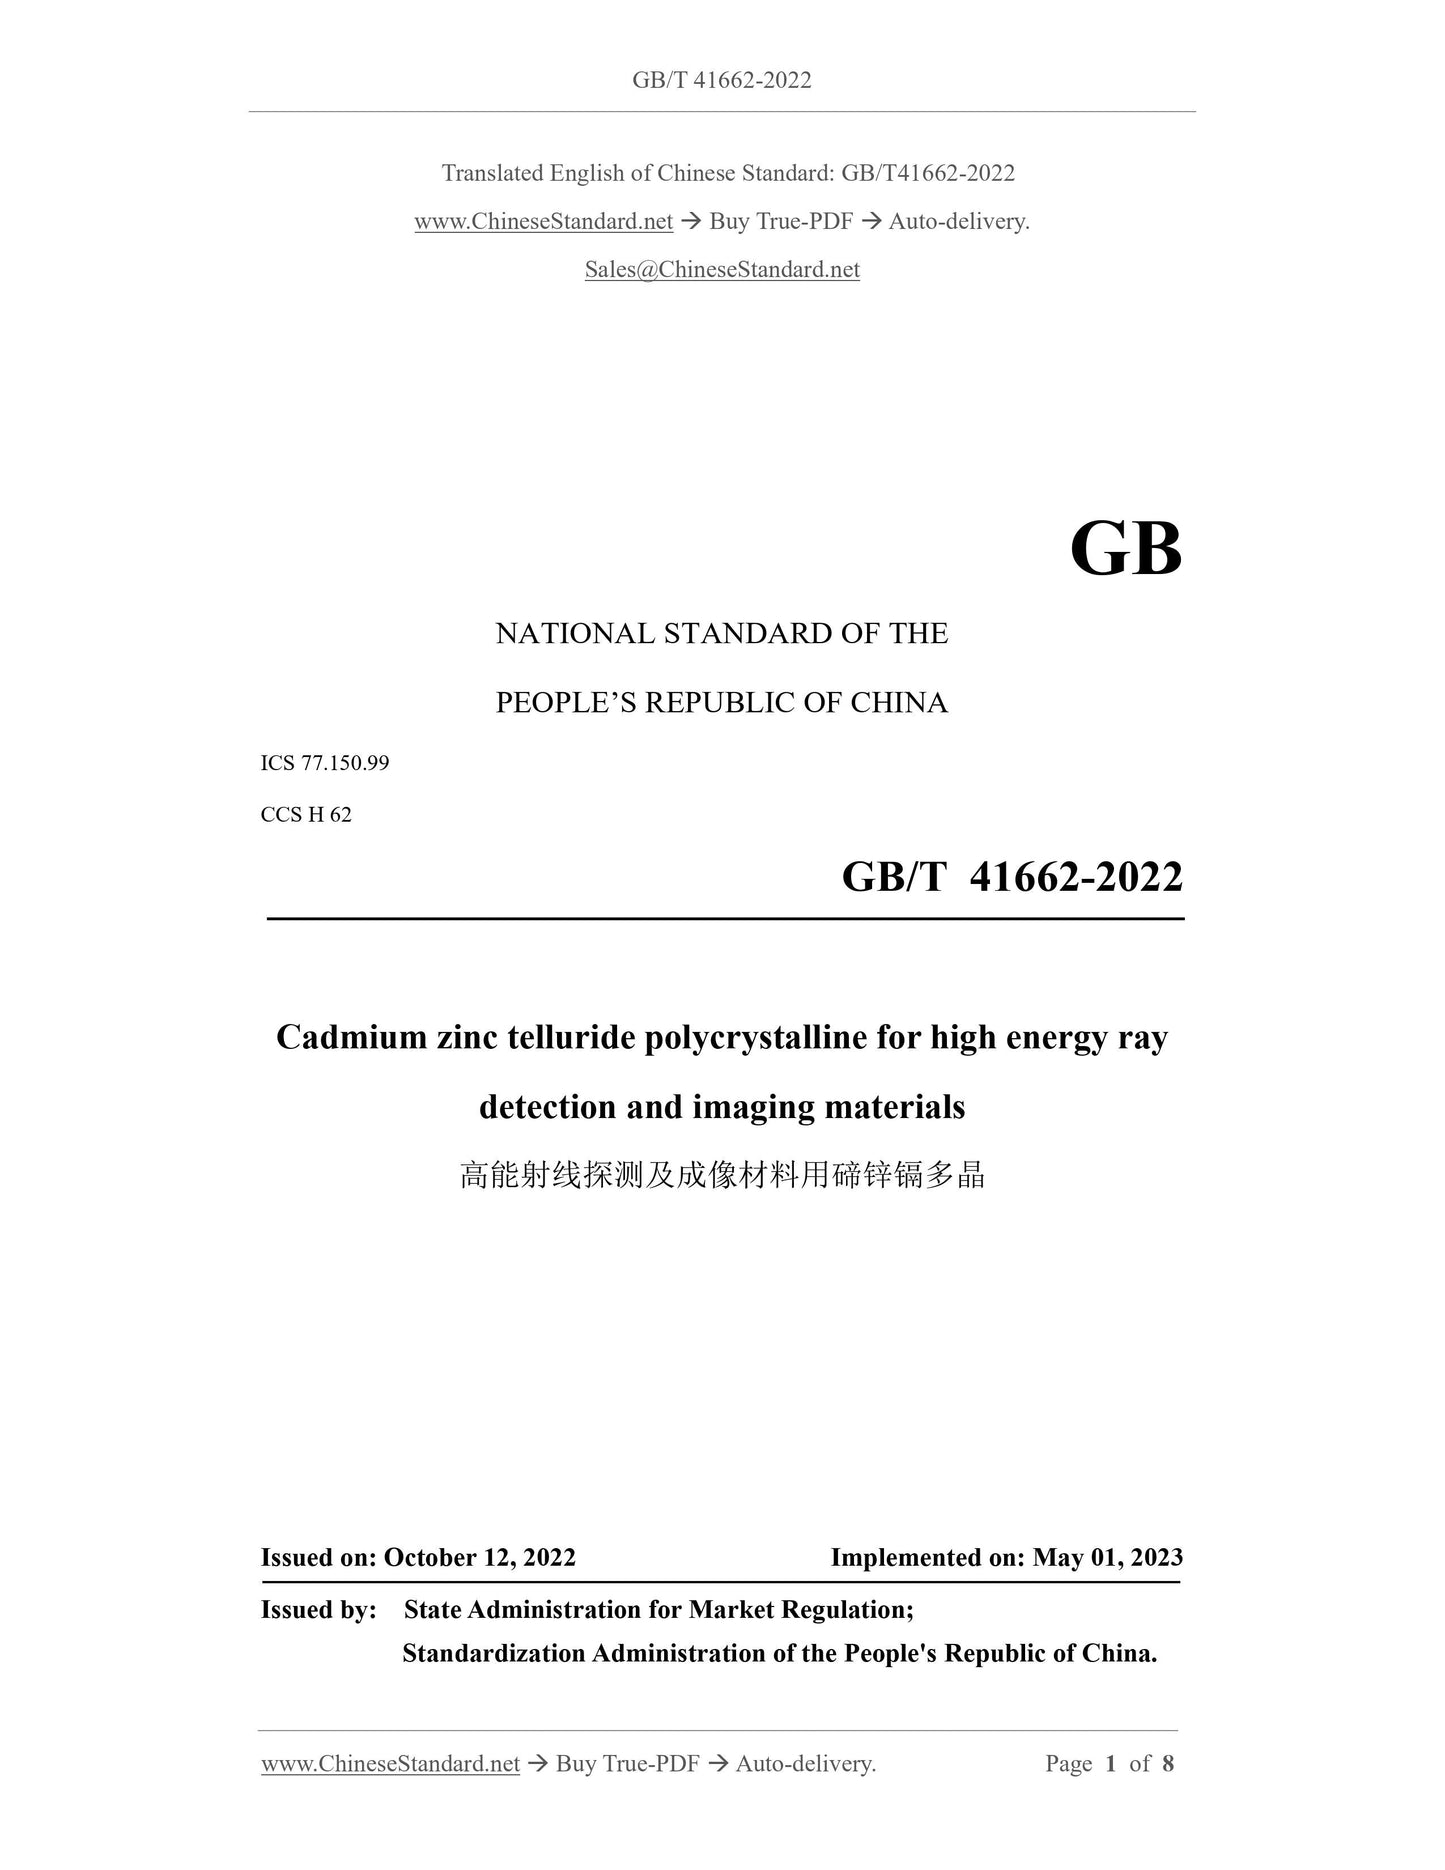 GB/T 41662-2022 Page 1